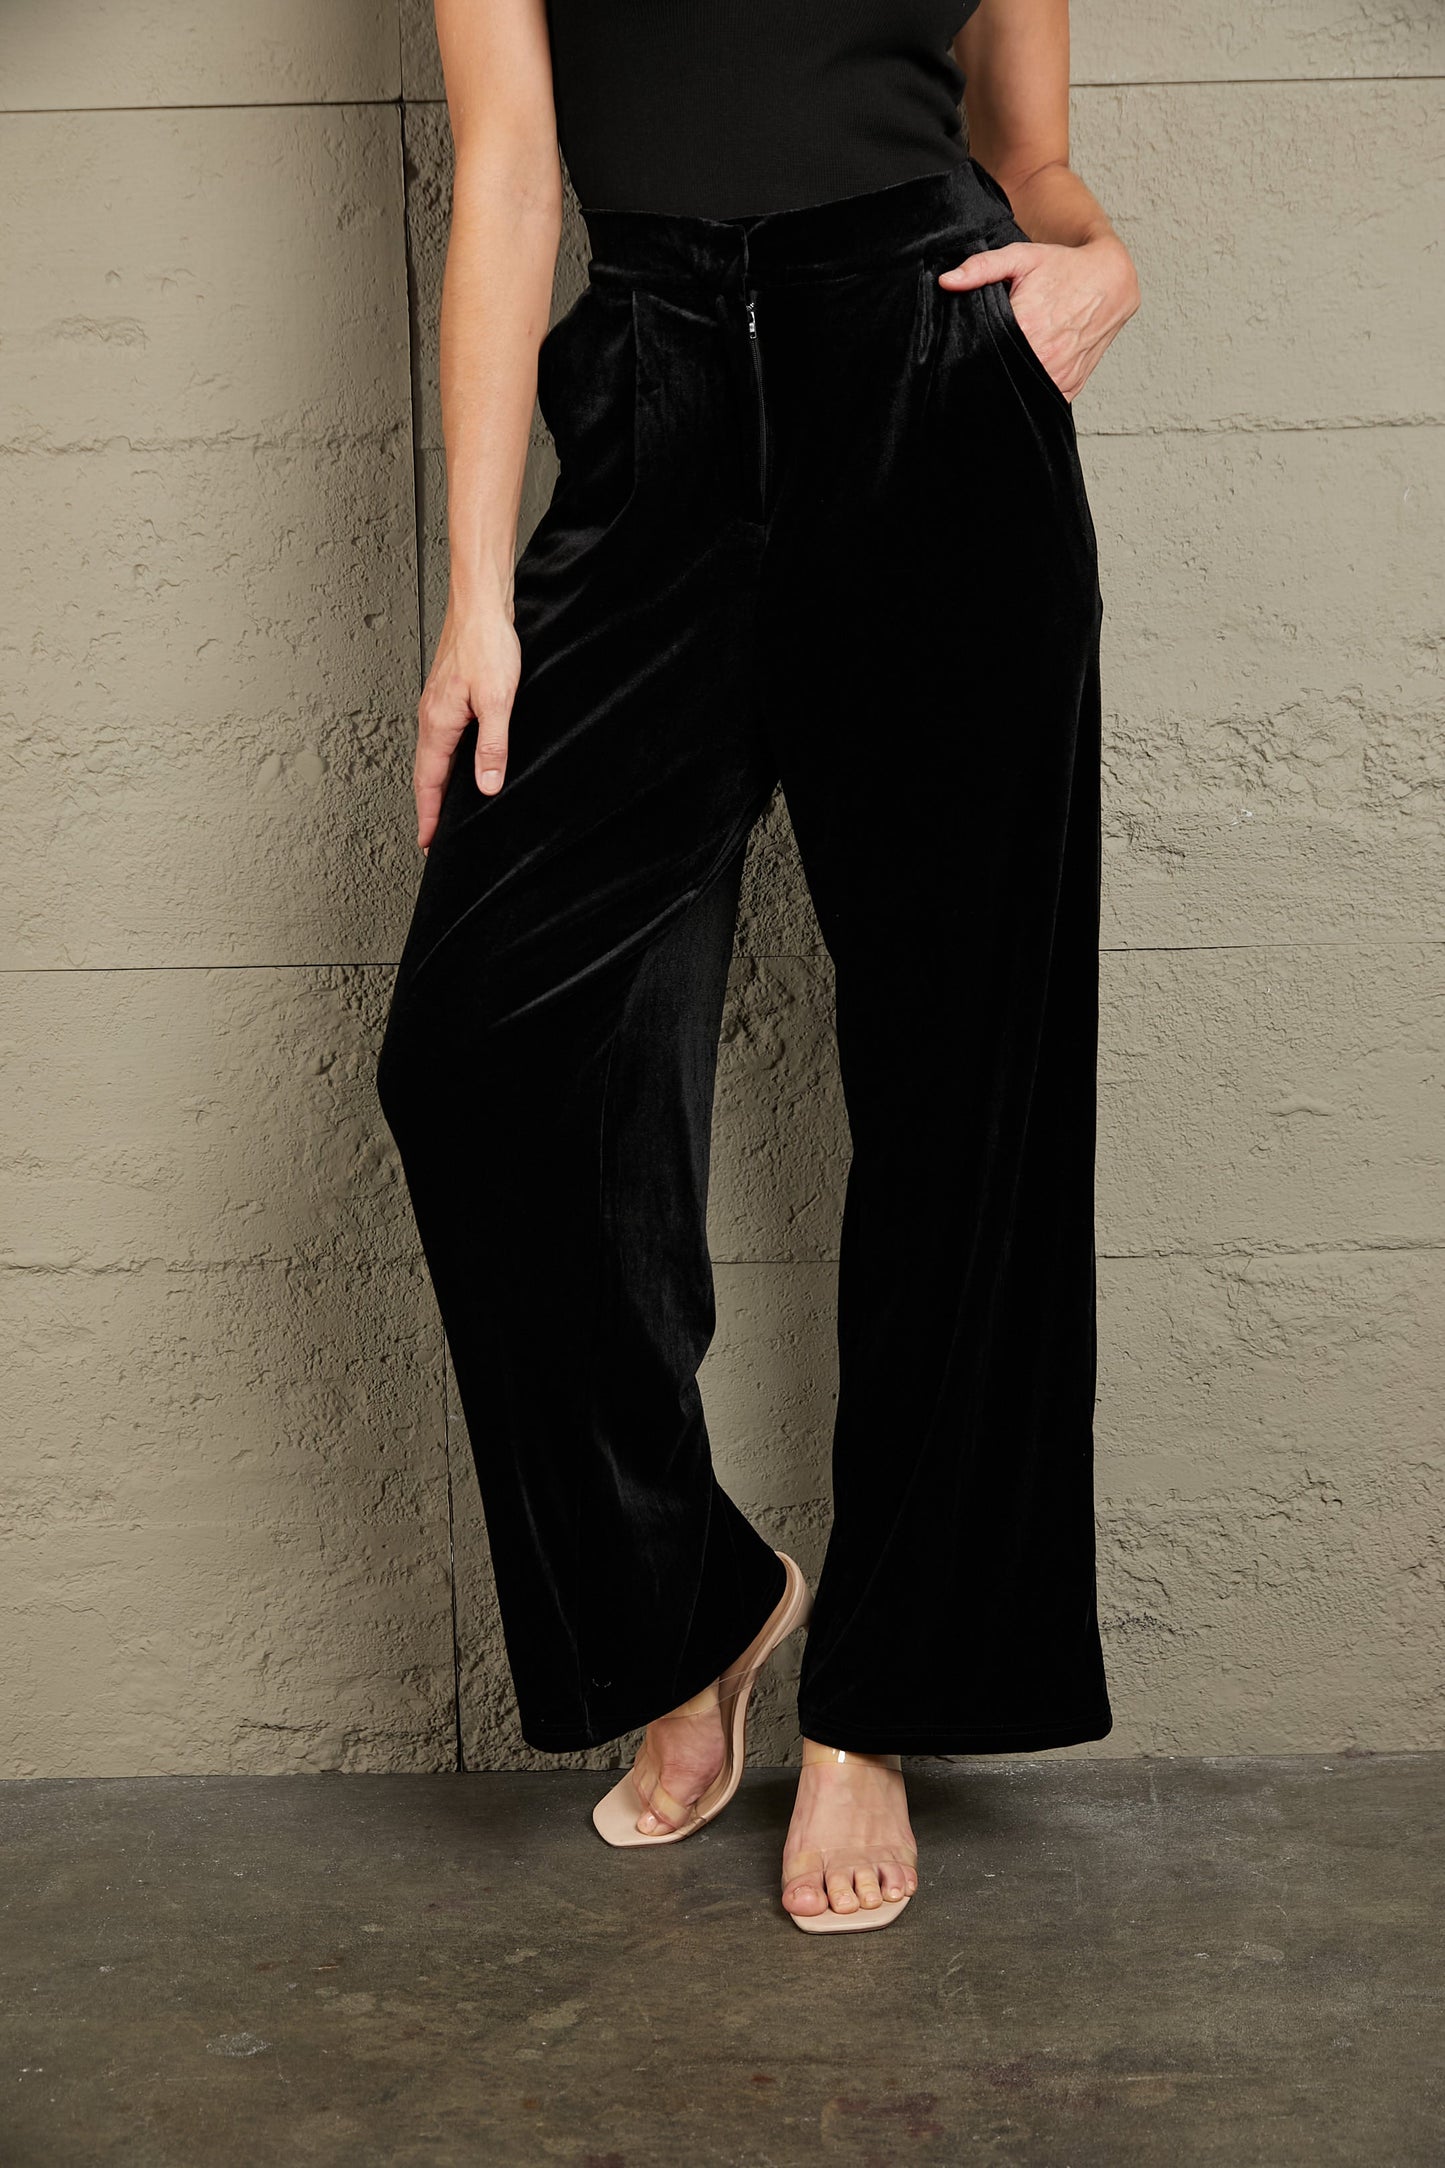 Double Take Loose Fit High Waist Long Pants with Pockets | Sugarz Chique Boutique